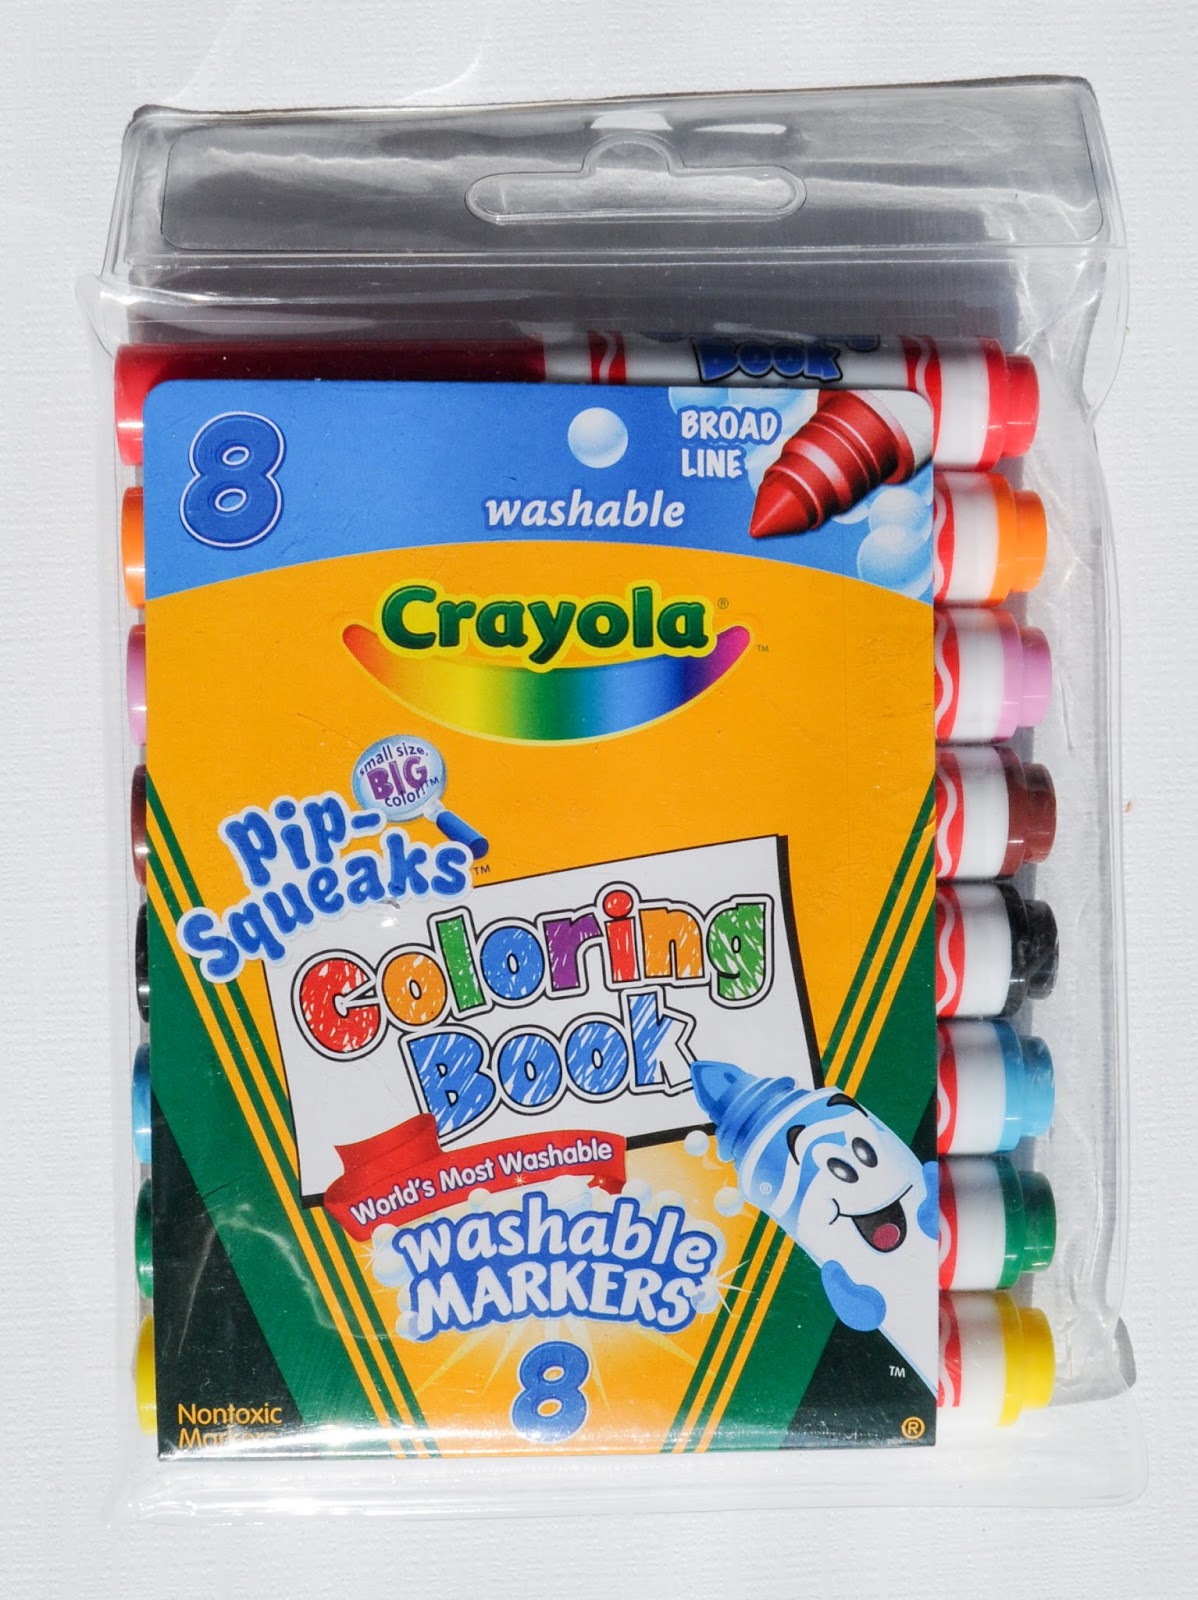 Download Coloring Book Crayons and Markers: What's Inside the Box | Jenny's Crayon Collection